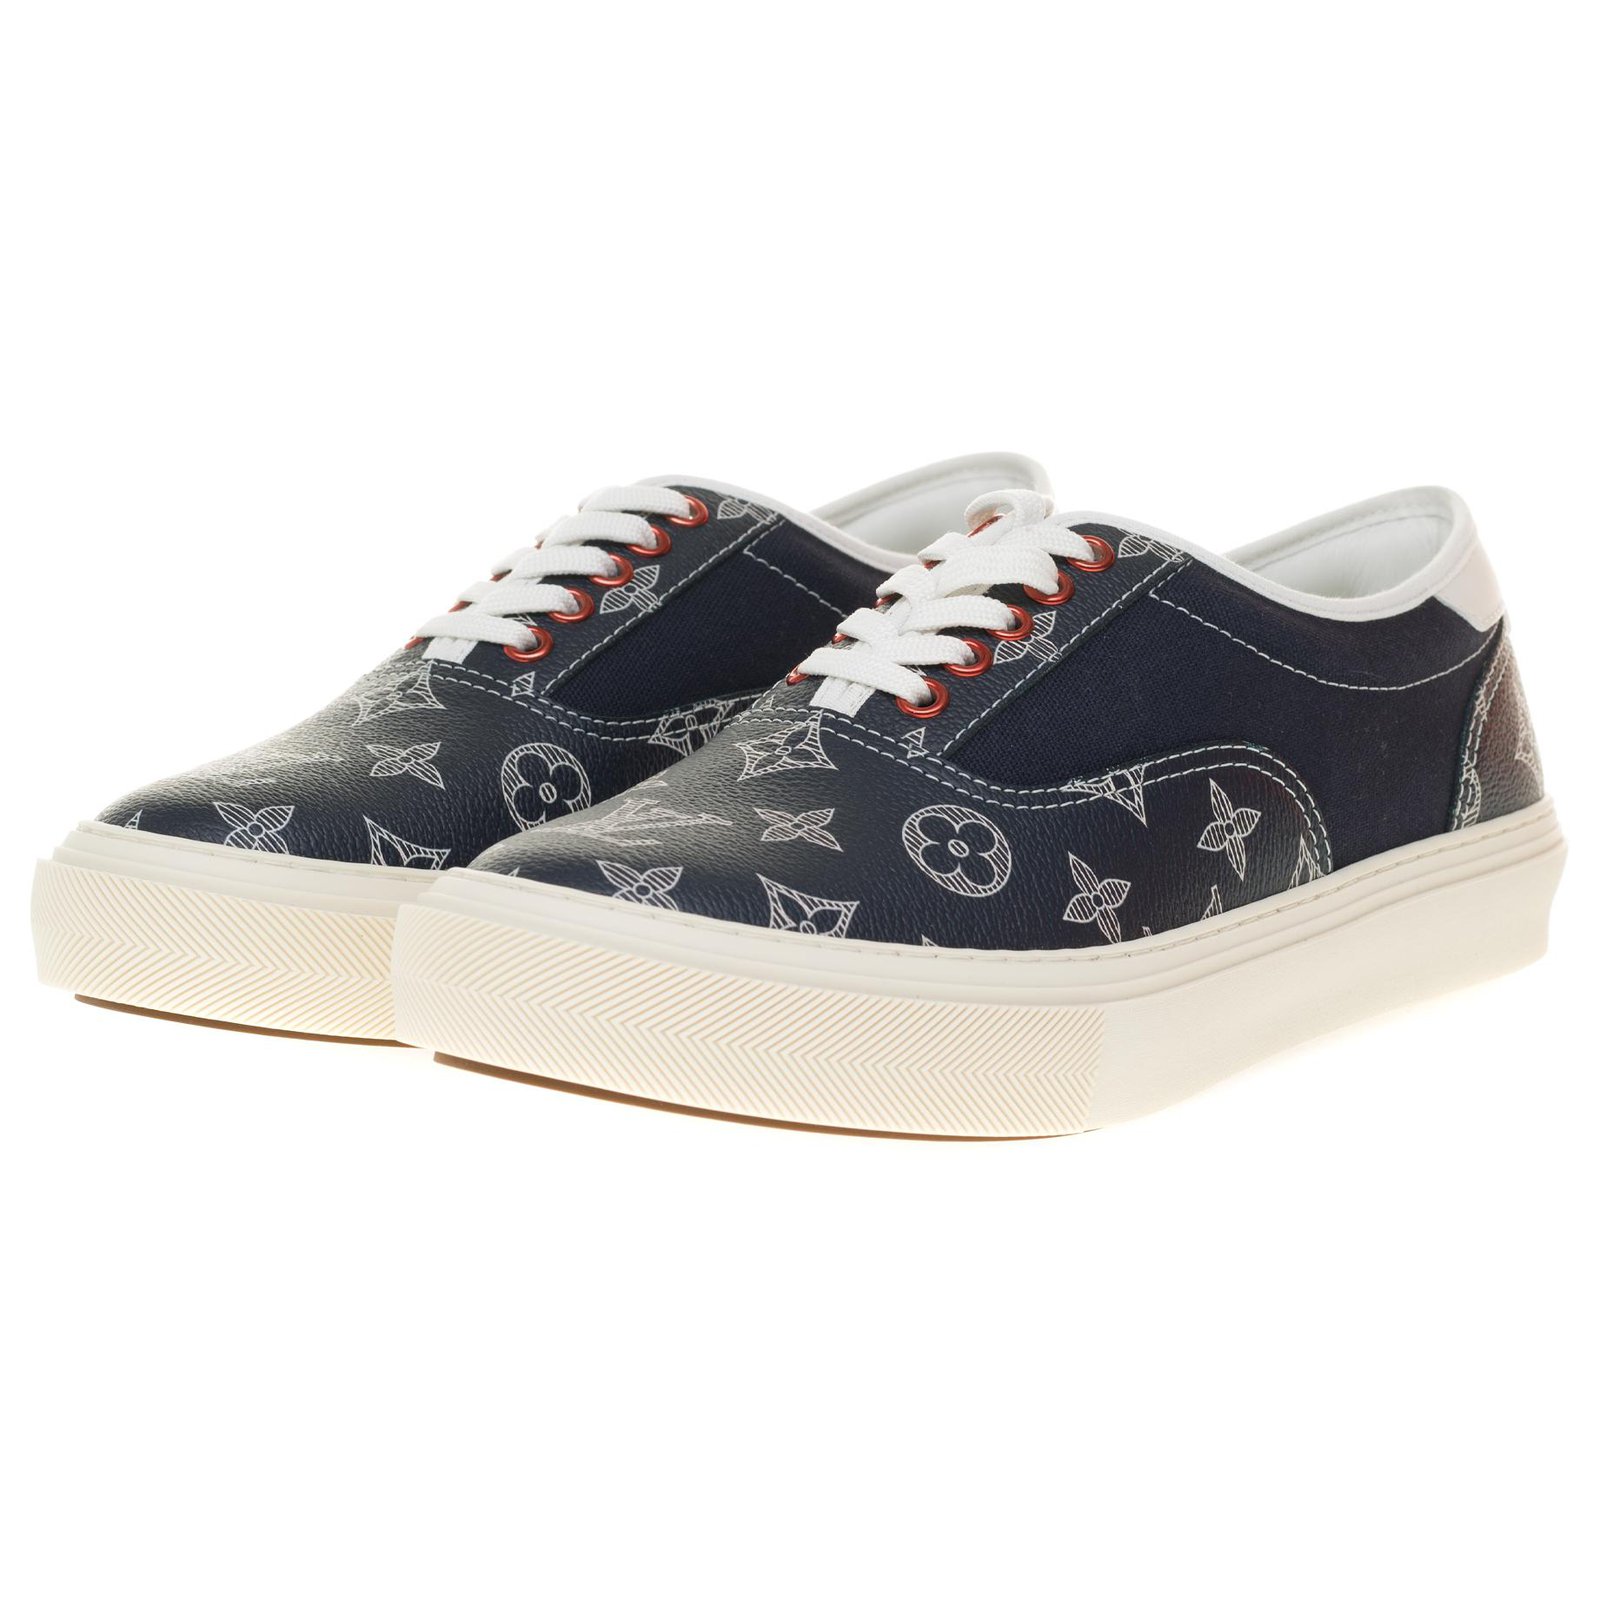 Louis Vuitton sneakers in black monogram canvas, taille 7, new